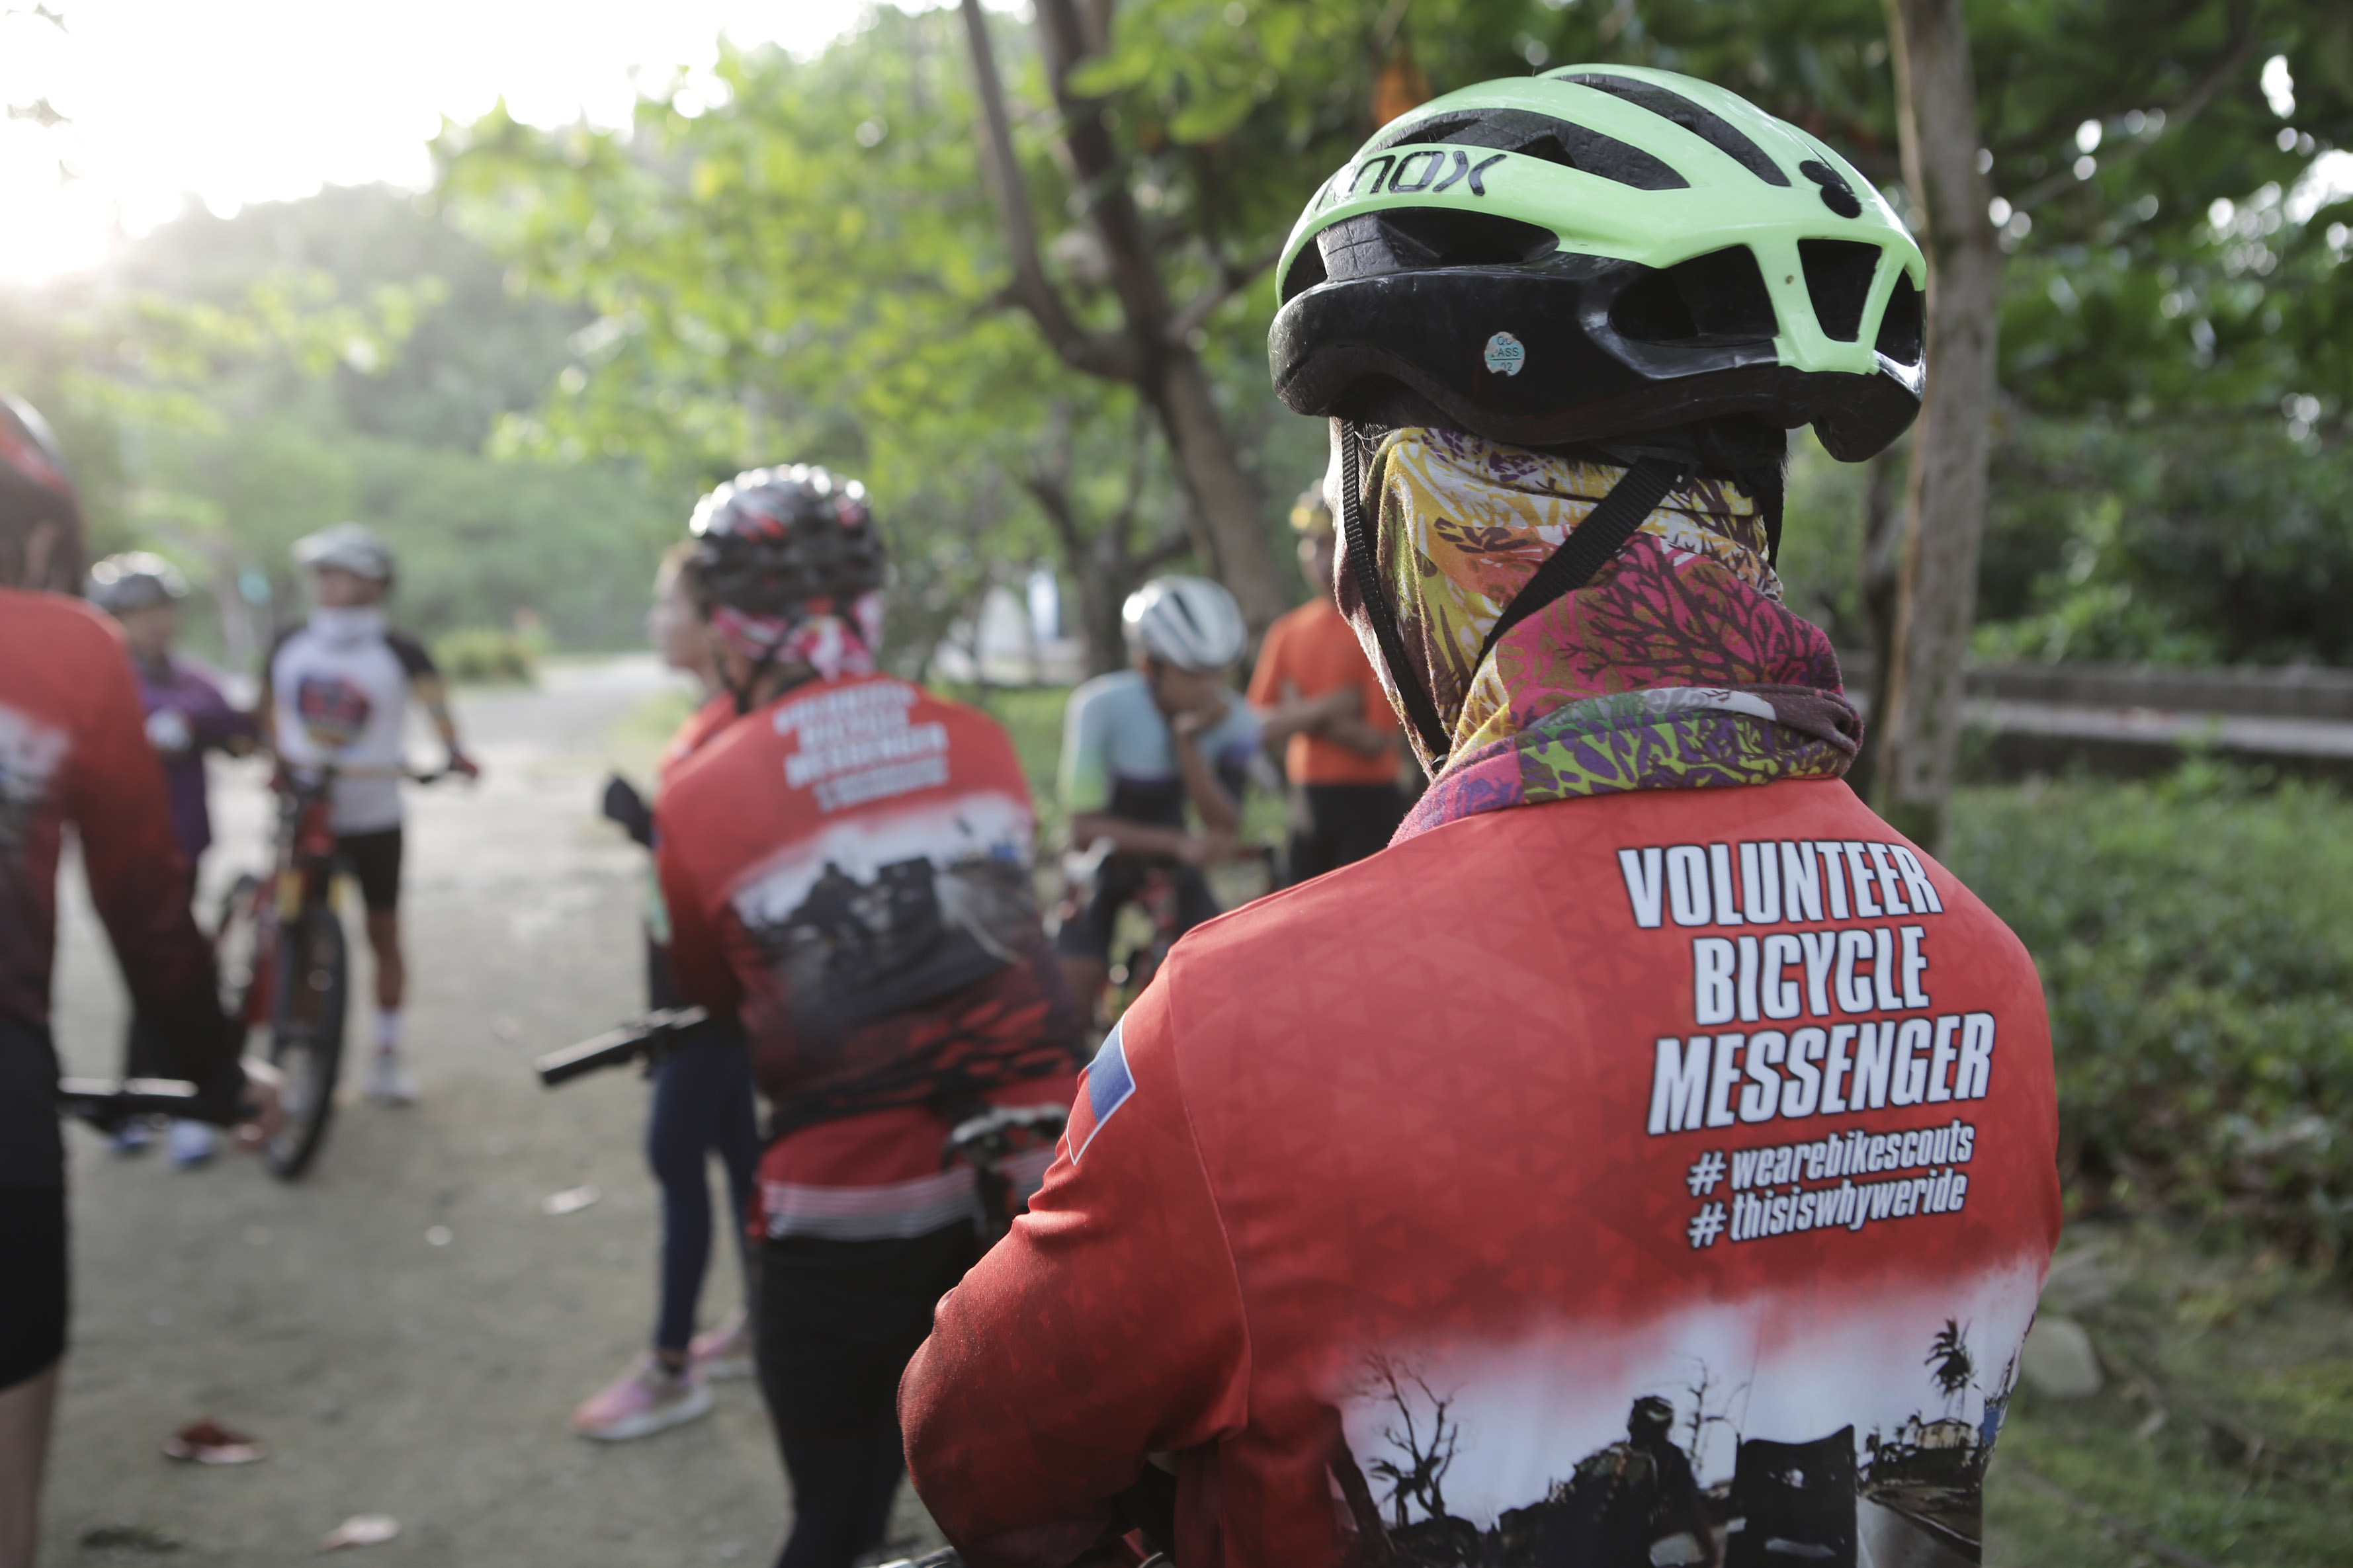  Pedalling for a purpose in the Philippines